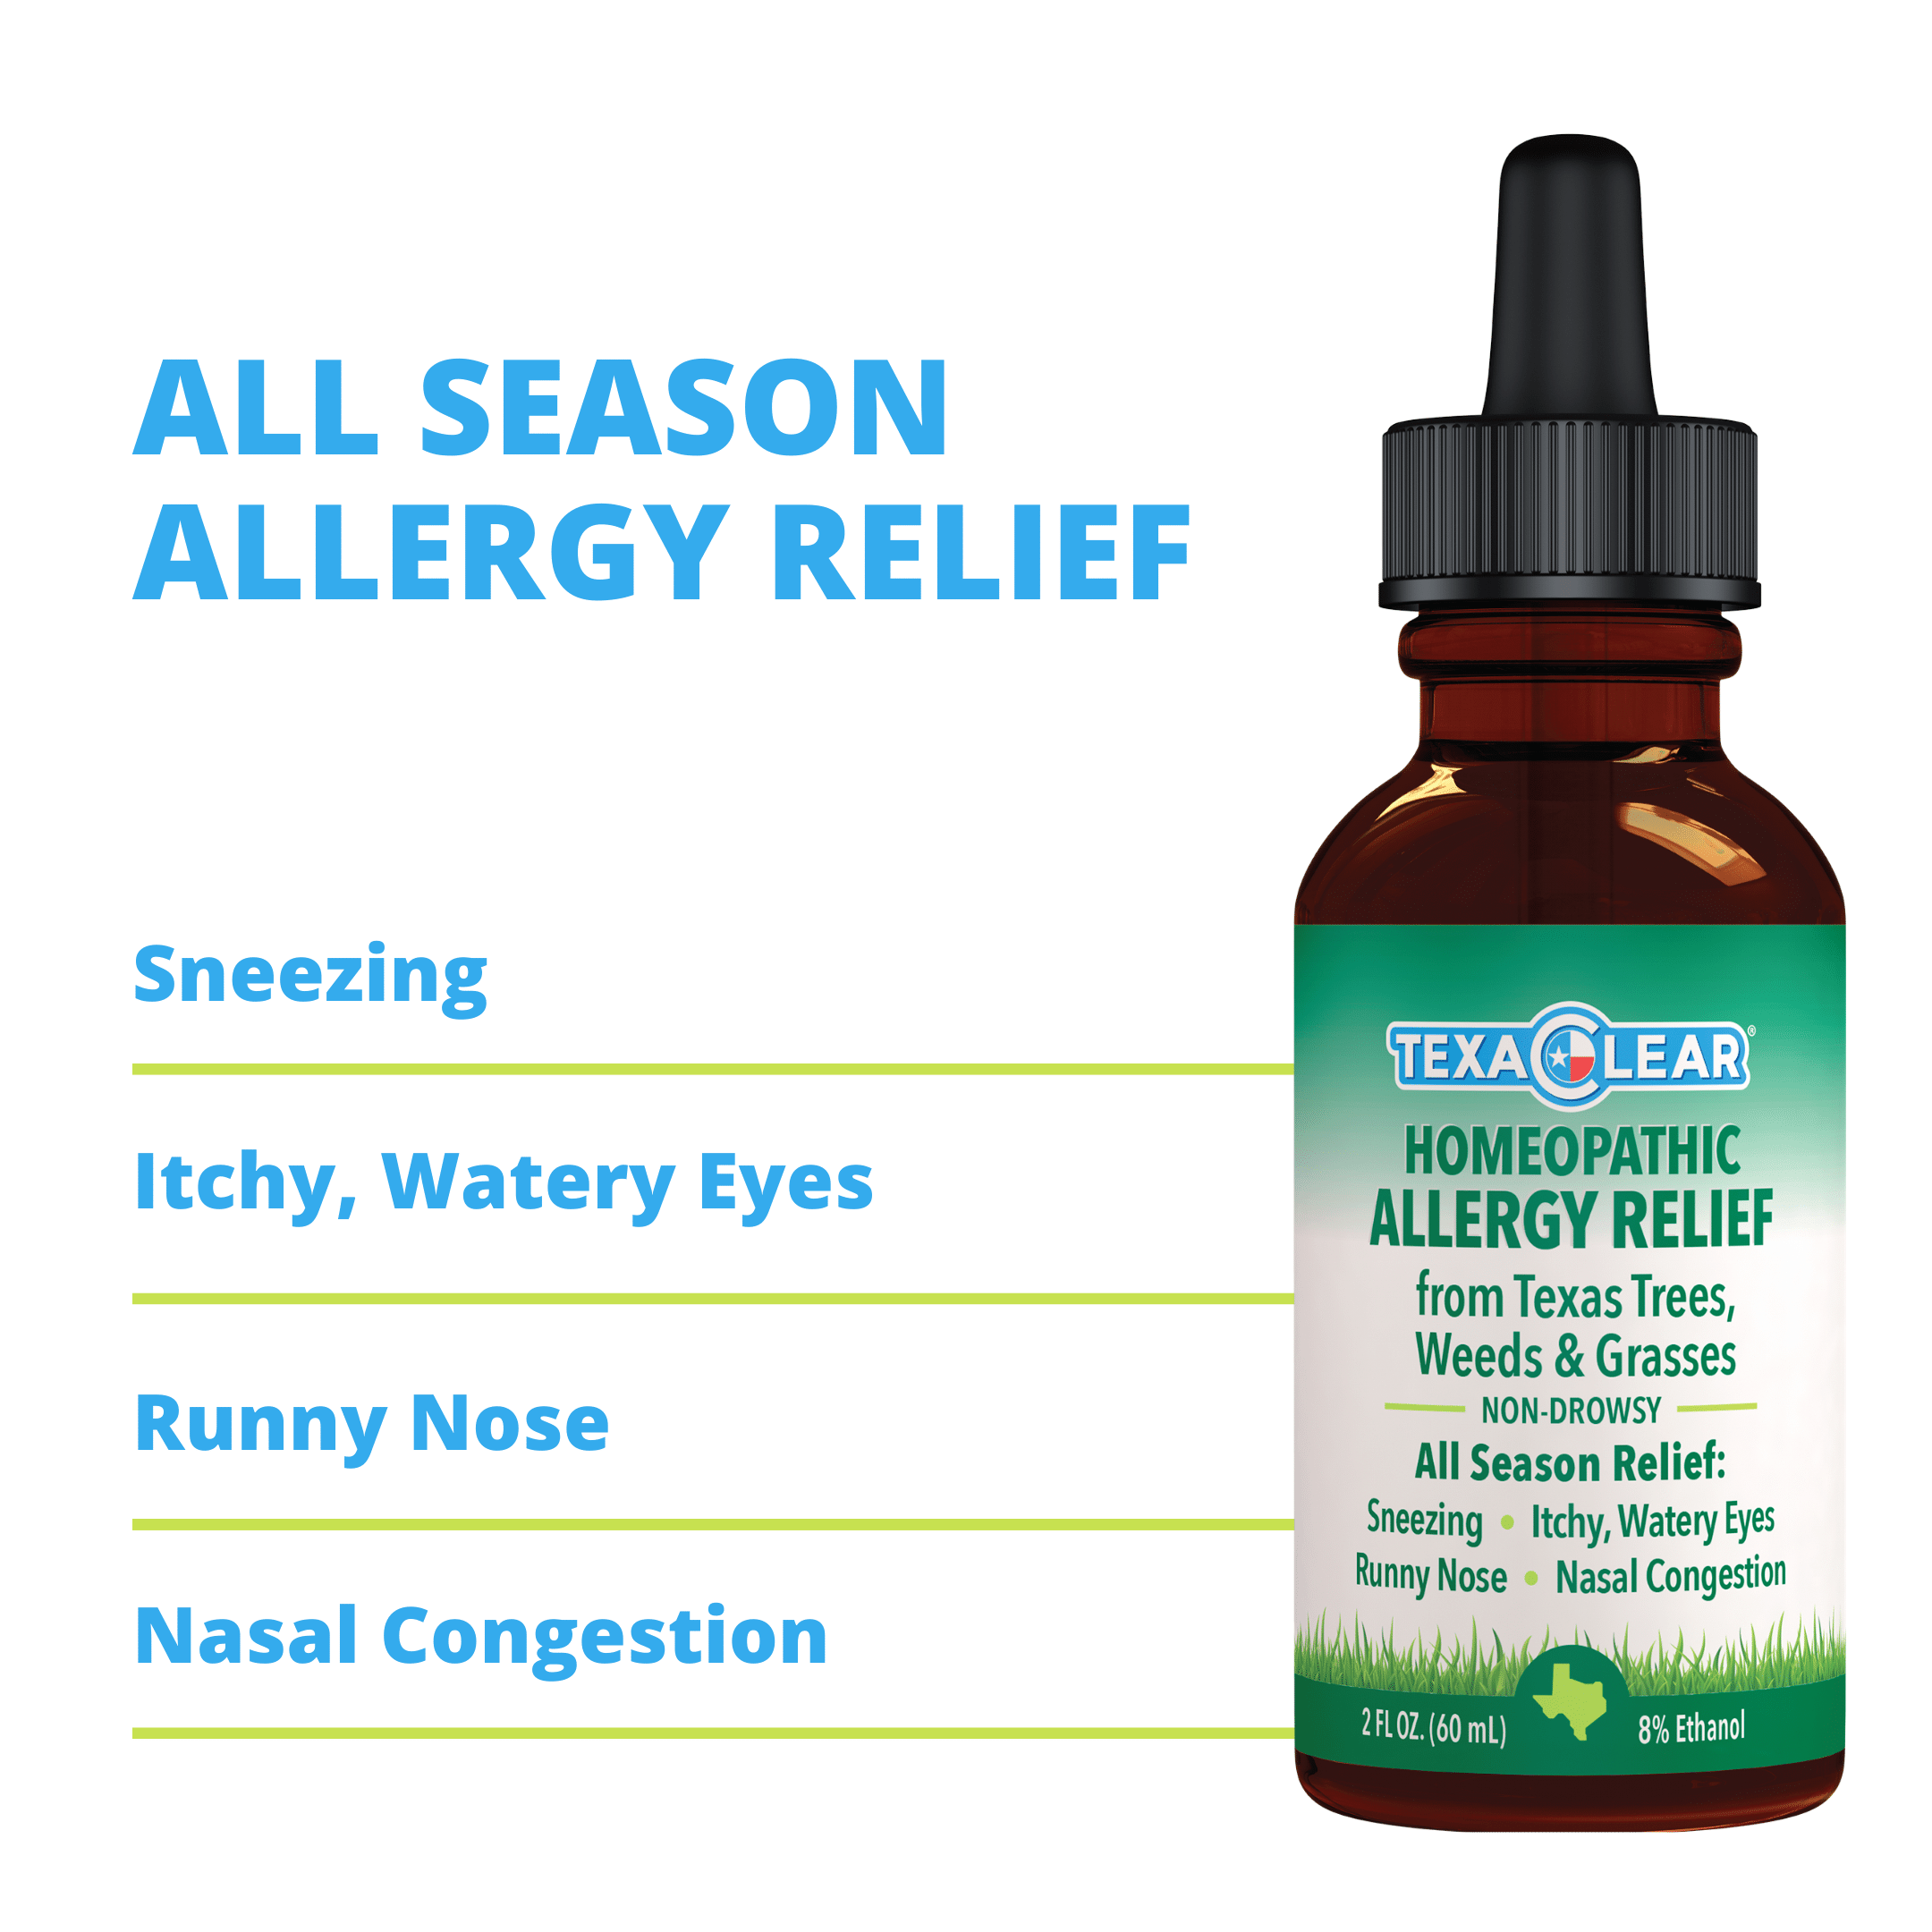 Get fast relief from sneezing, itchy, watery eyes, runny nose and nasal congestion. 